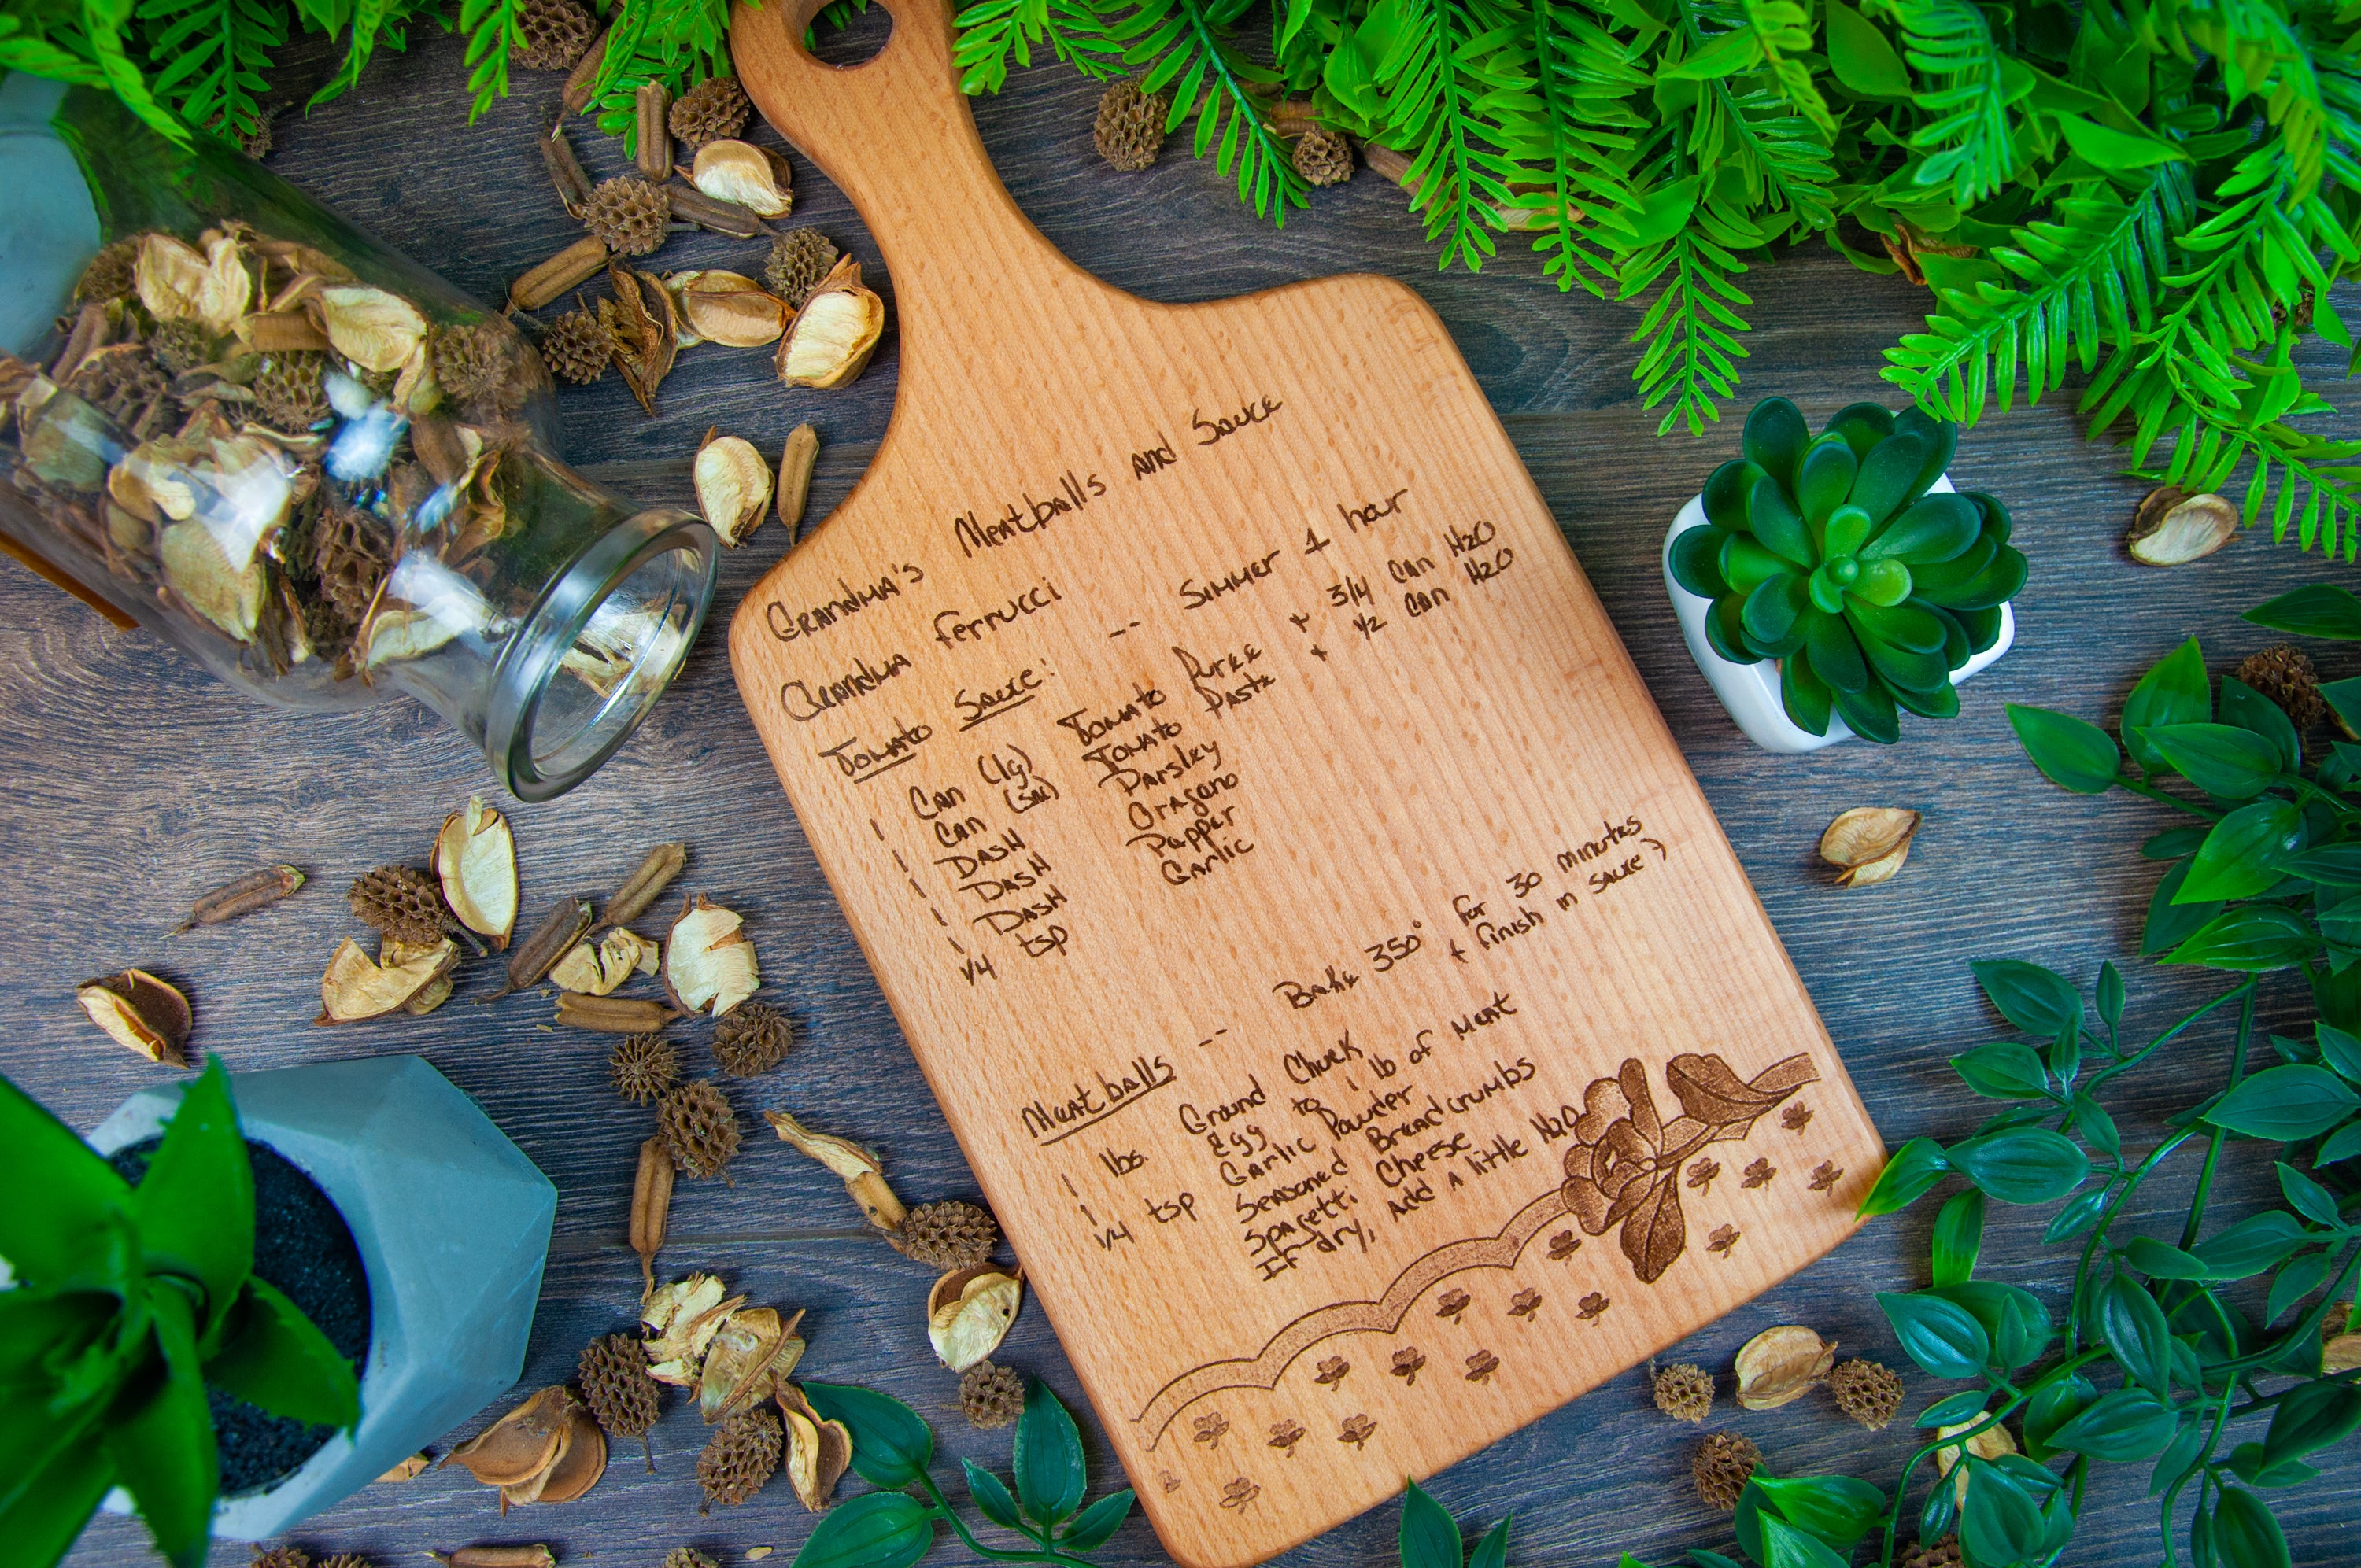 RECIPE CUTTING BOARD MOTHERS DAY GIFT GIFT FOR HER PERSONALIZED GIFT KITCHEN DECOR